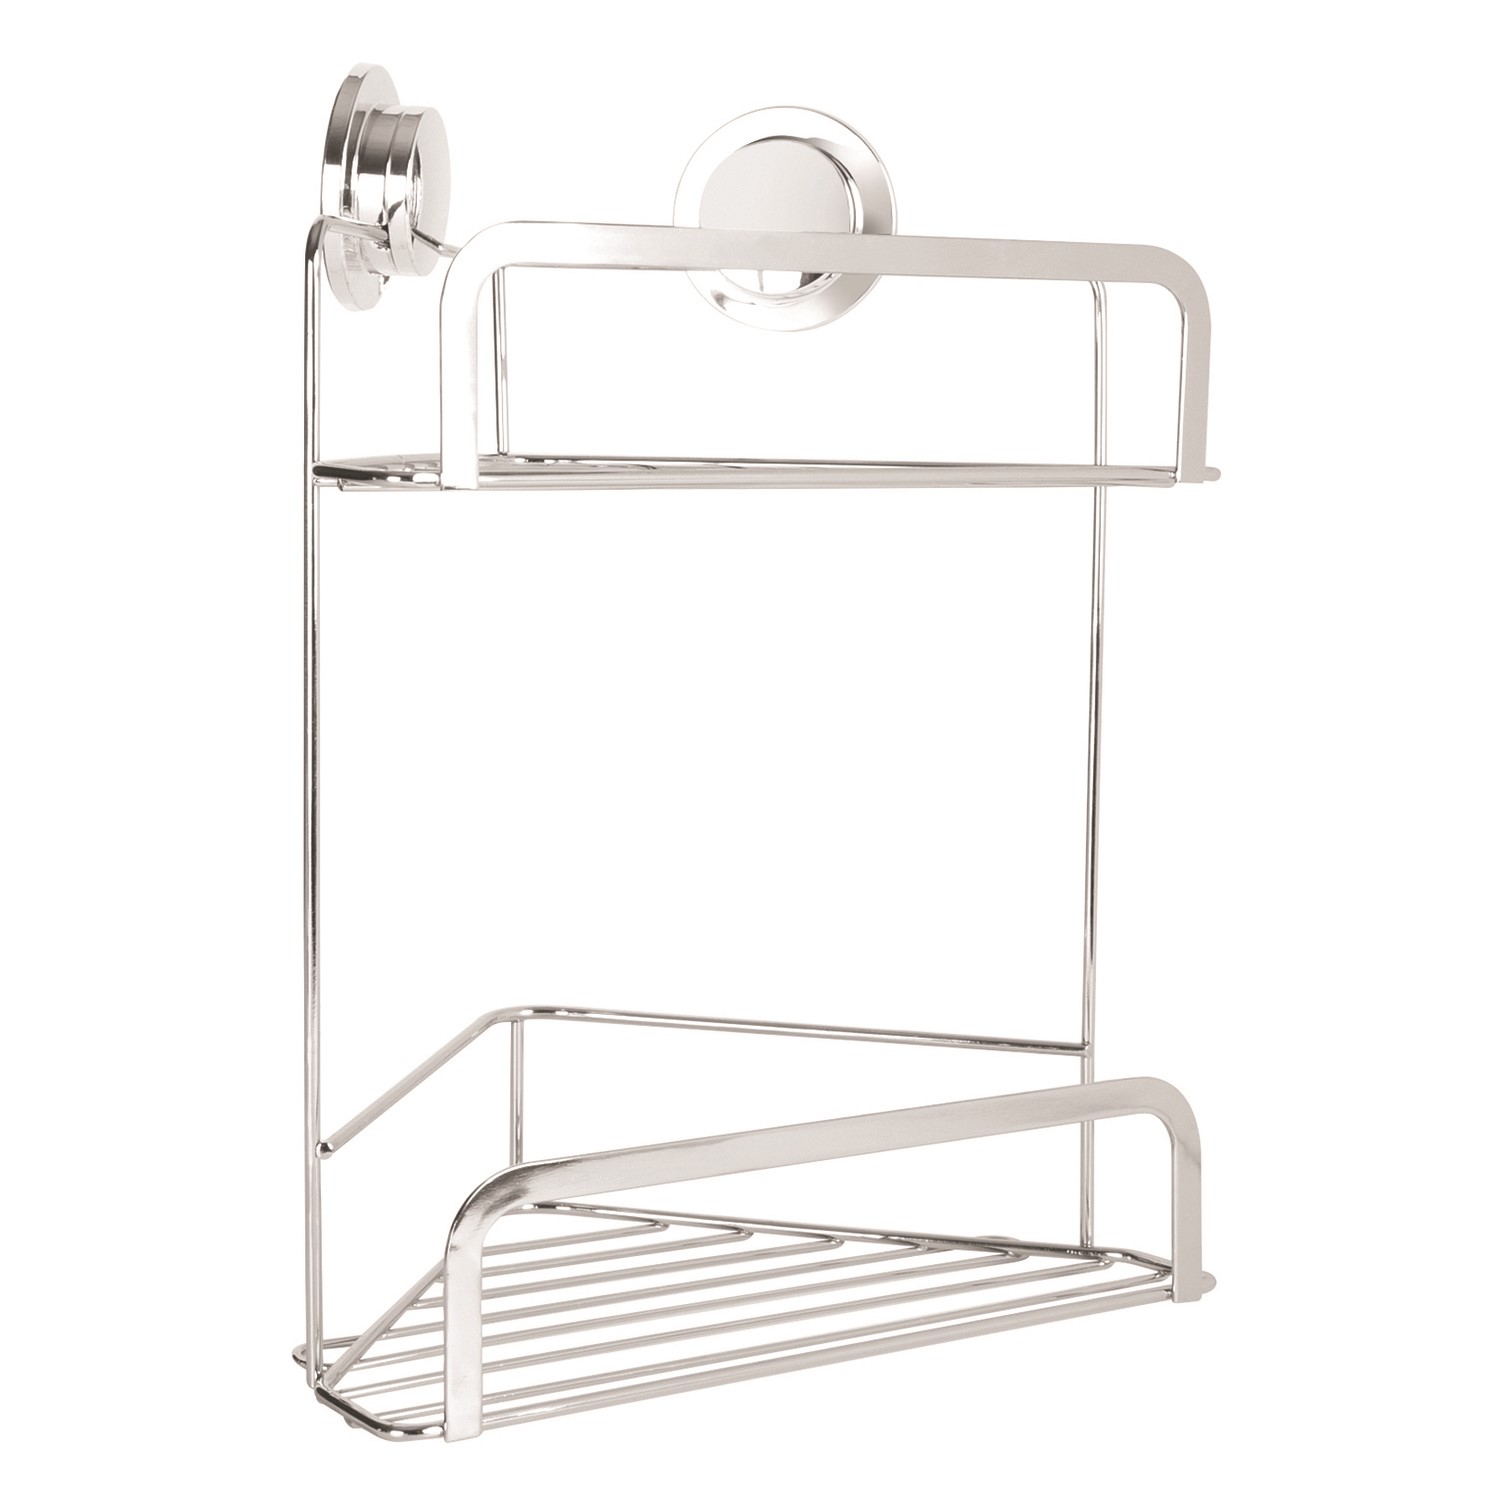 Croydex Stick 'n' Lock Adhesive Two Tier Shower Caddy, Chrome - On